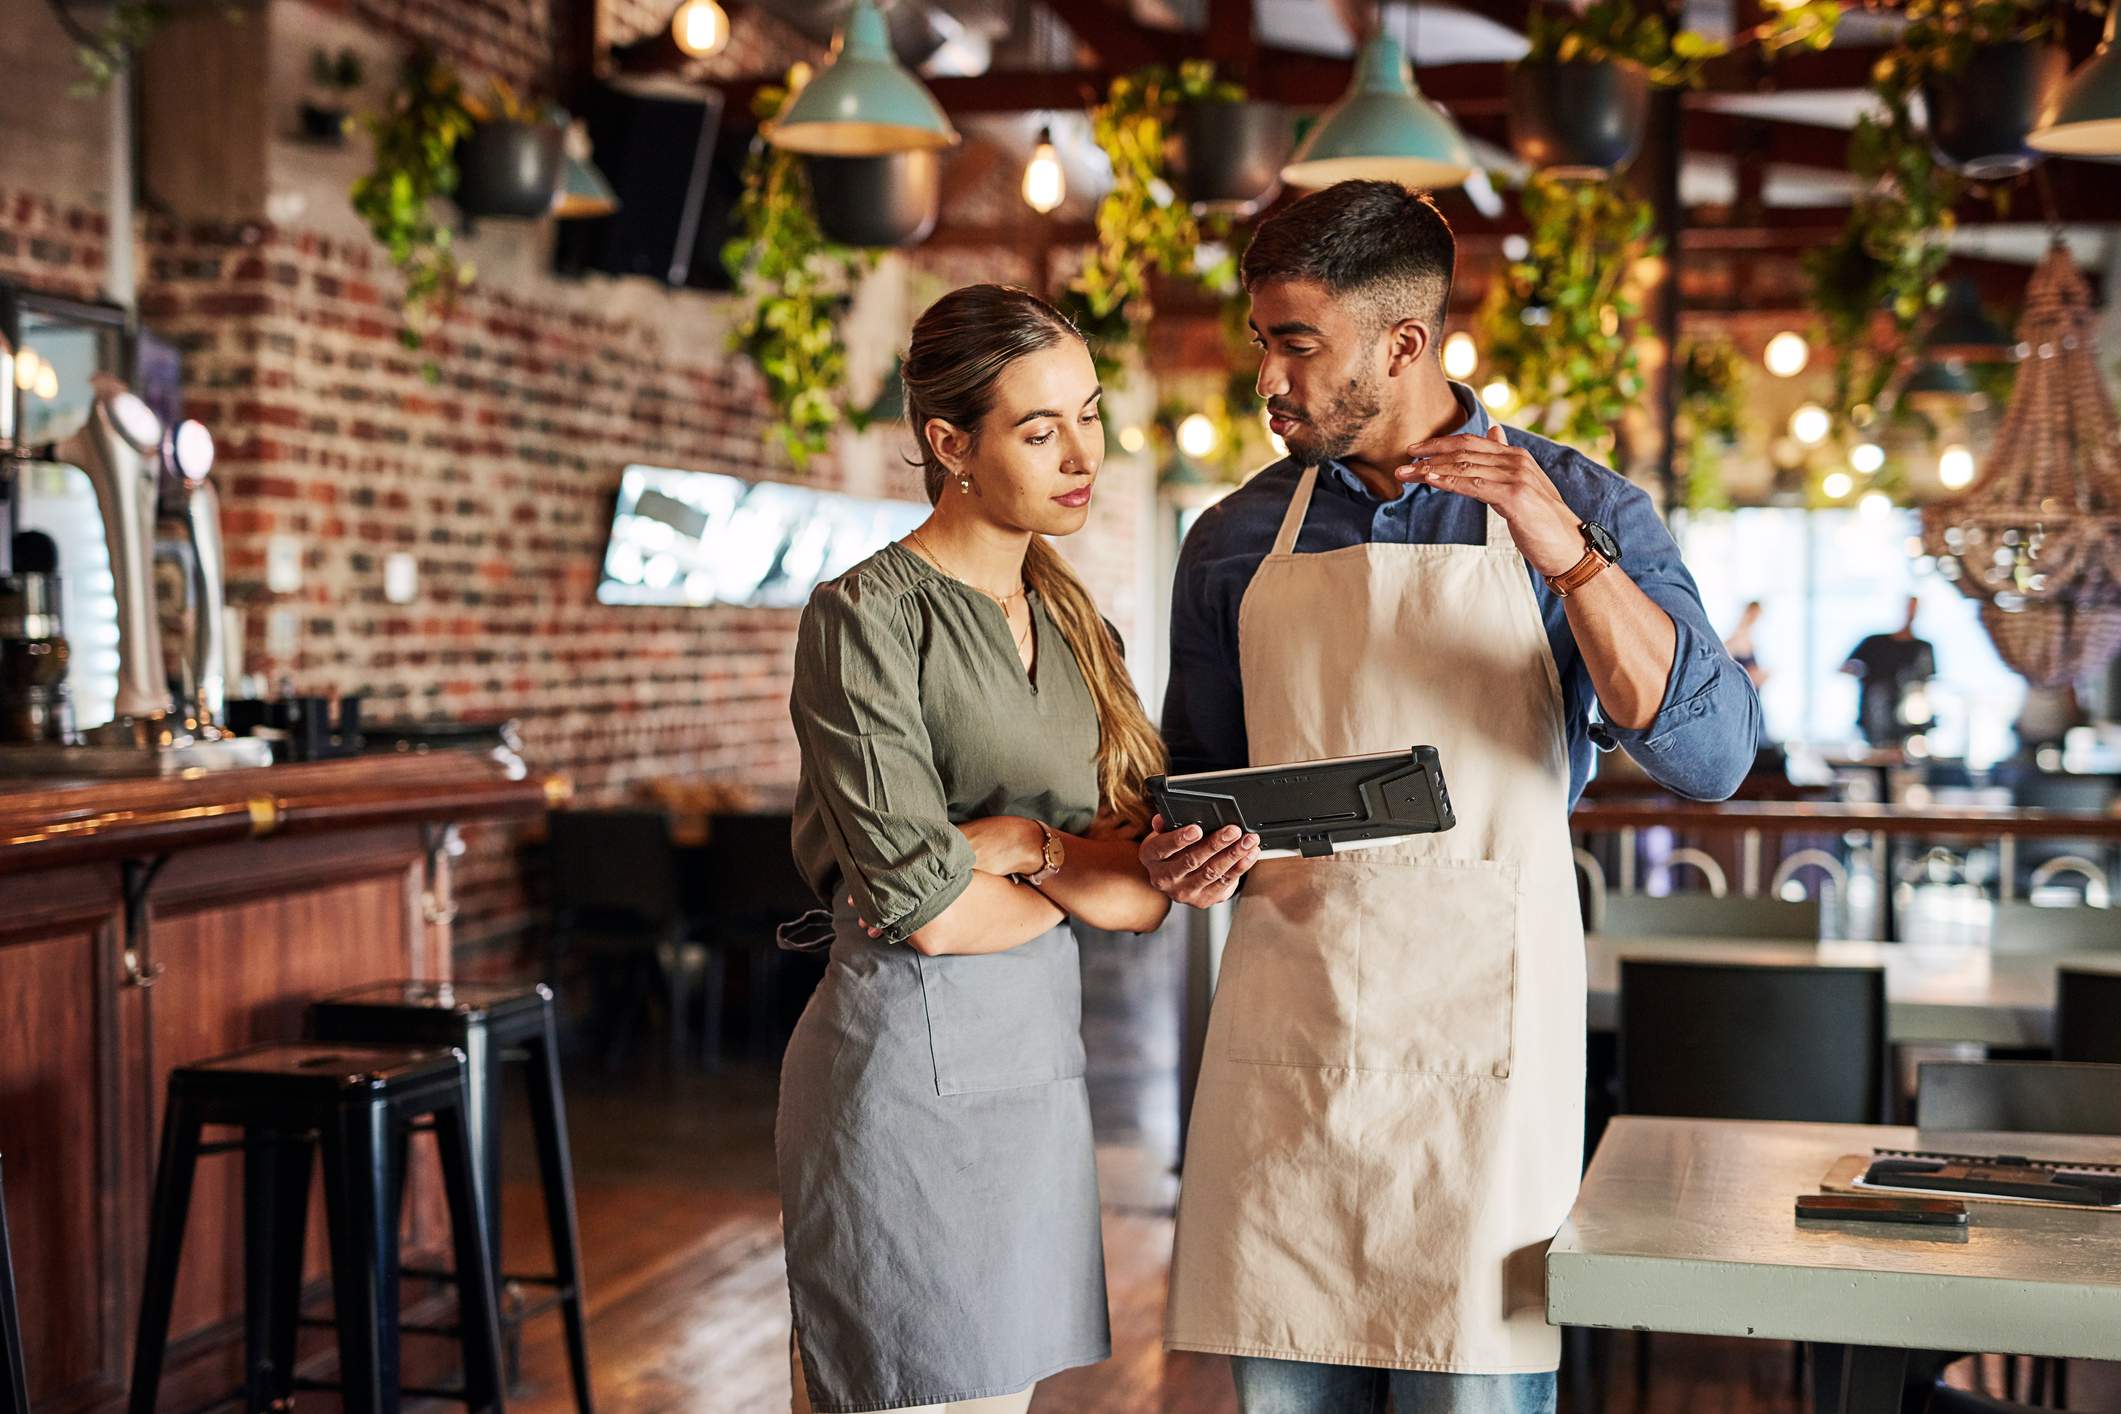 Image depicts two restaurant workers discussing something on a tablet.